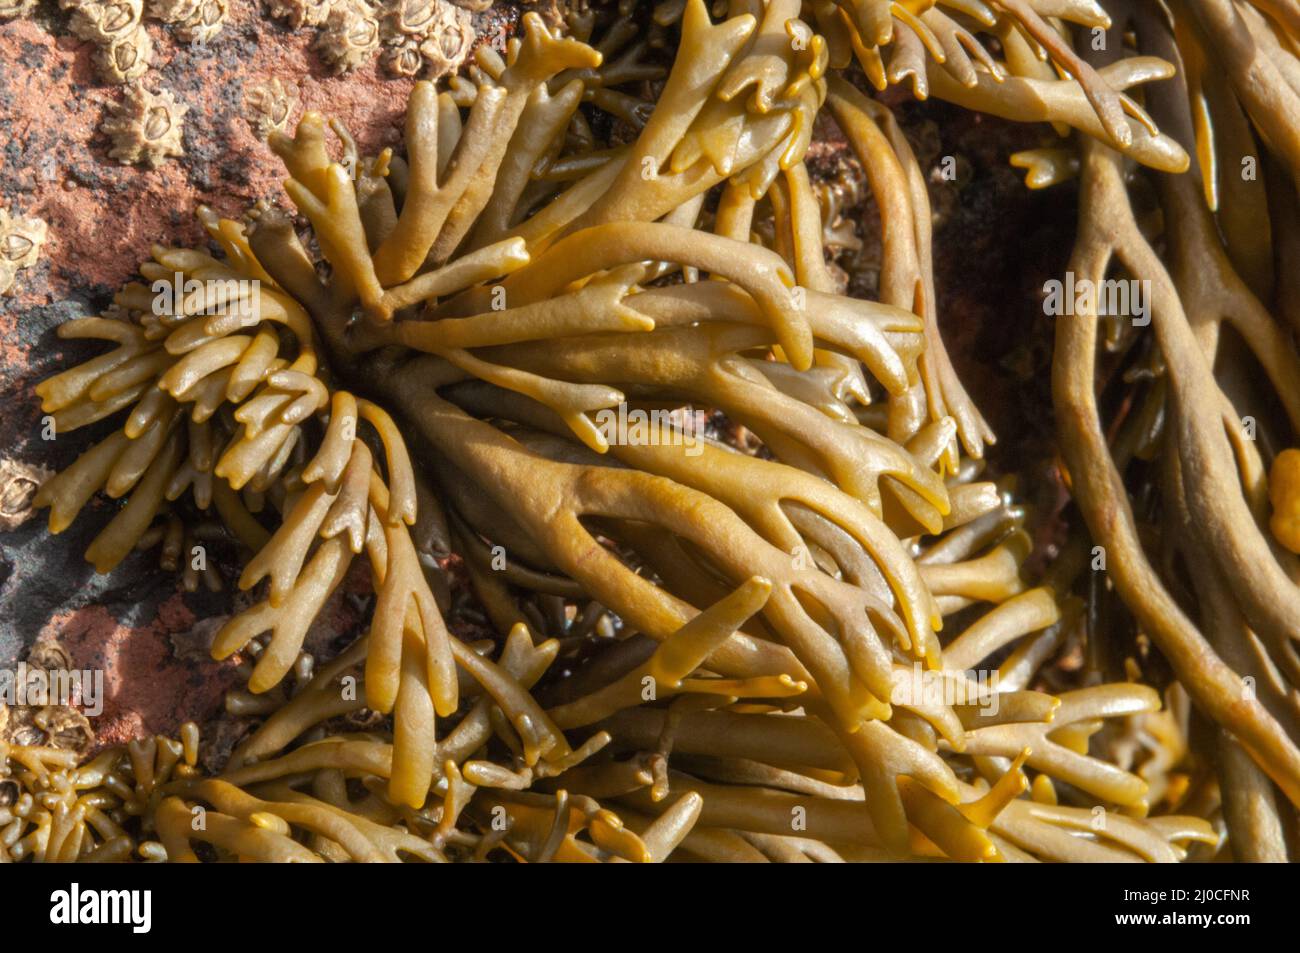 Channeled wrack (Pelvetia canaliculata) brown seaweed growing in the upper poart of the intertidal zone. Stock Photo